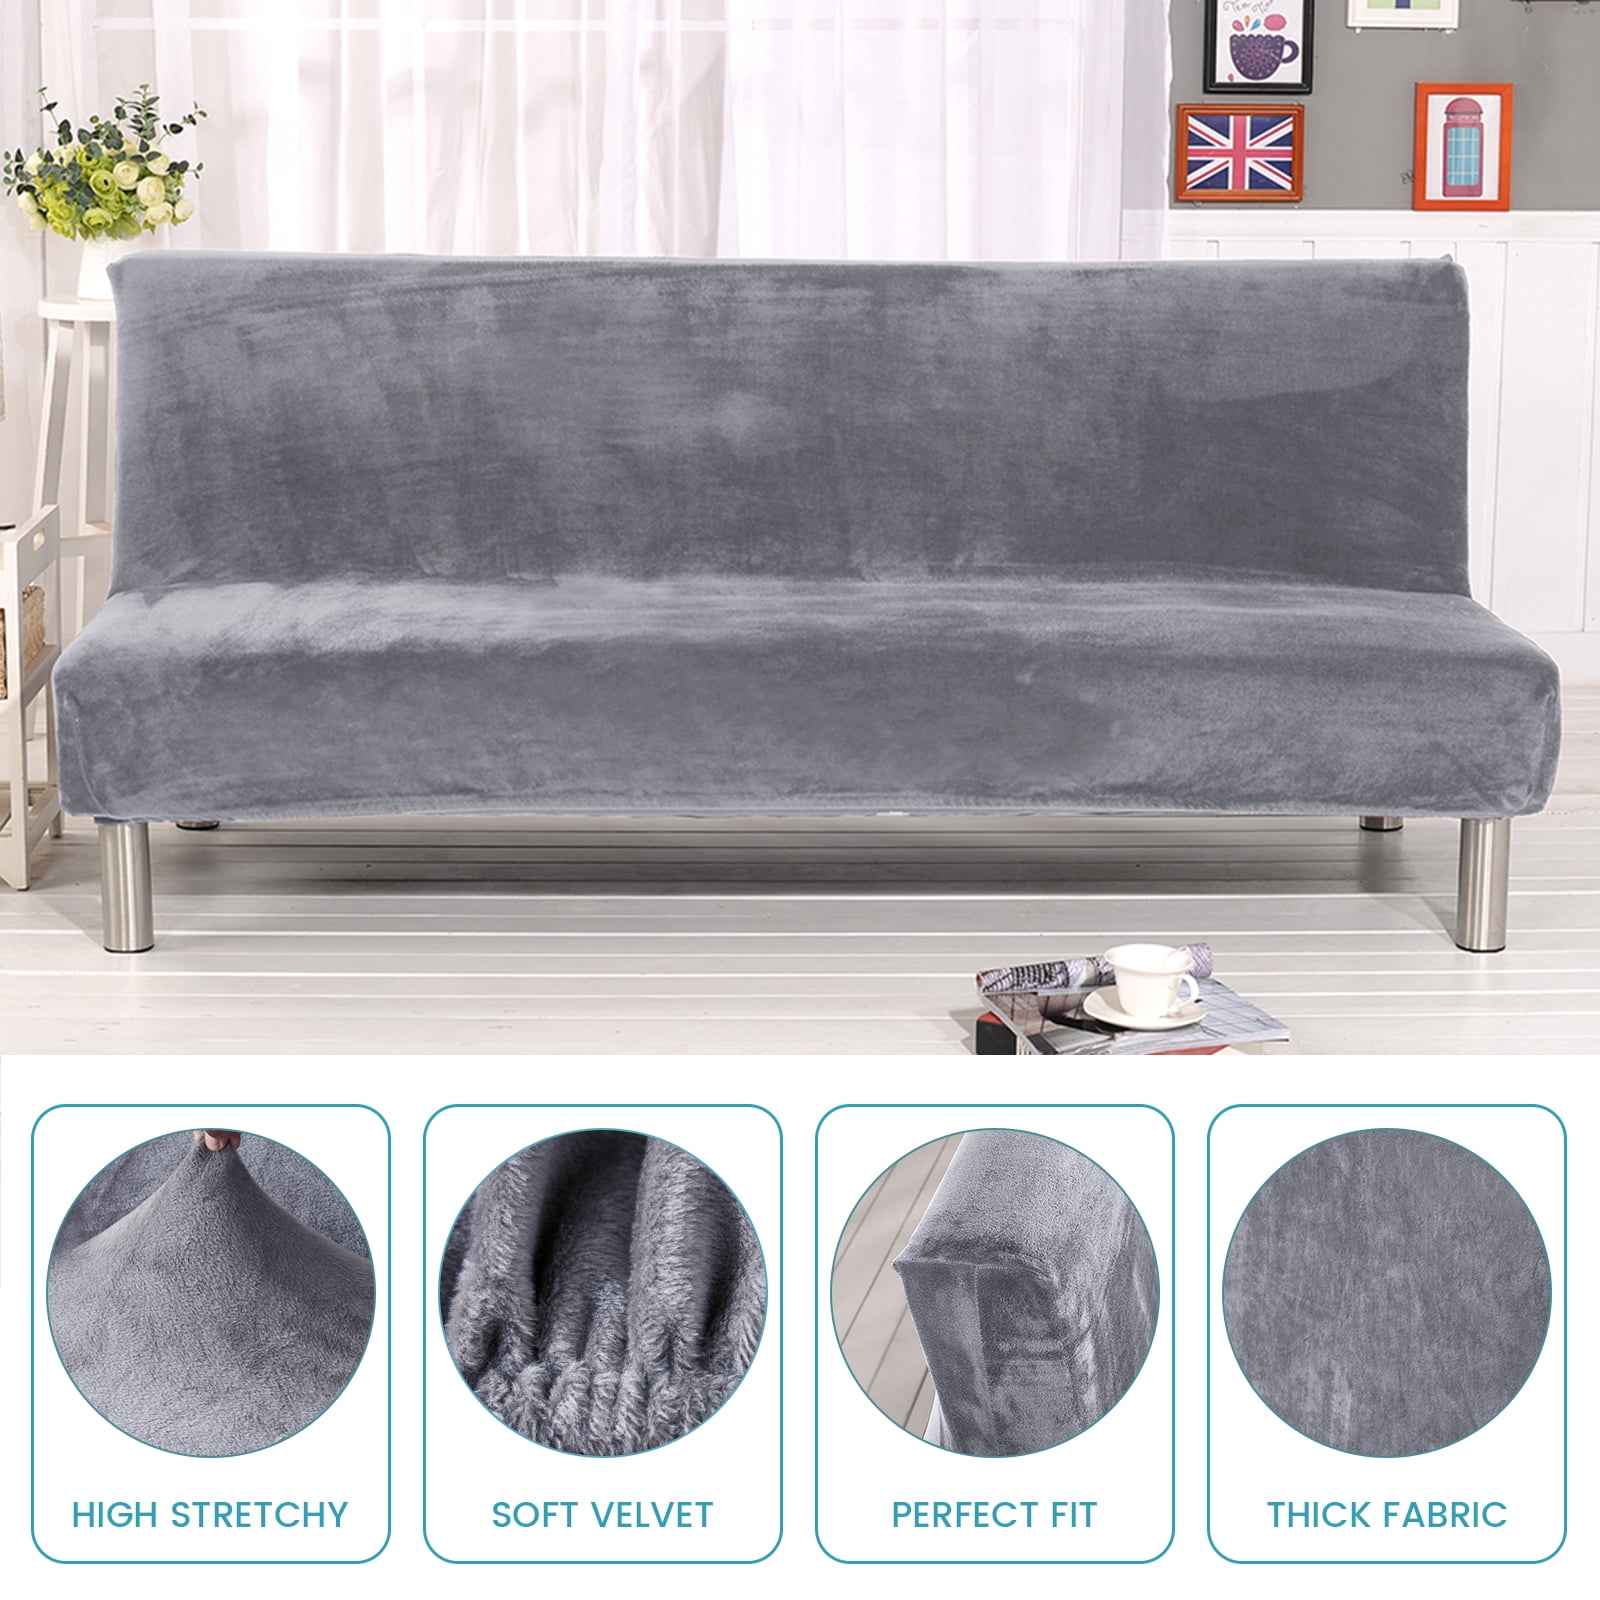 Details about   H.VERSAILTEX Armless Futon Cover Stretch Sofa Bed Slipcover Protector Elastic Fe 